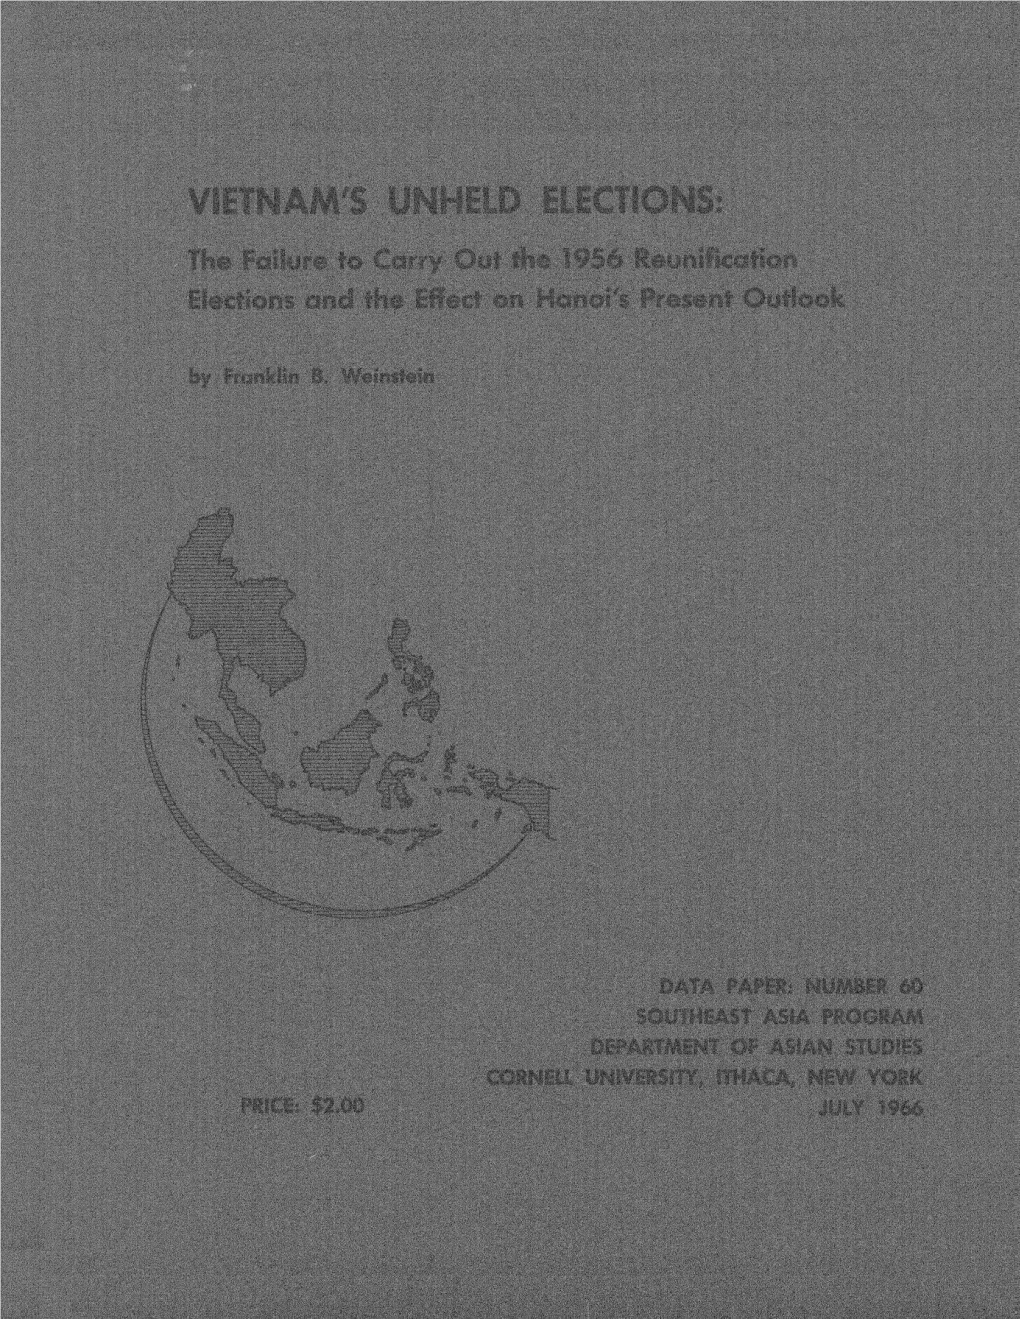 Vietnam's Unheld Elections; the Failure to Carry out the 1956 Reunification Elections and the Effect on Hanoi's Present